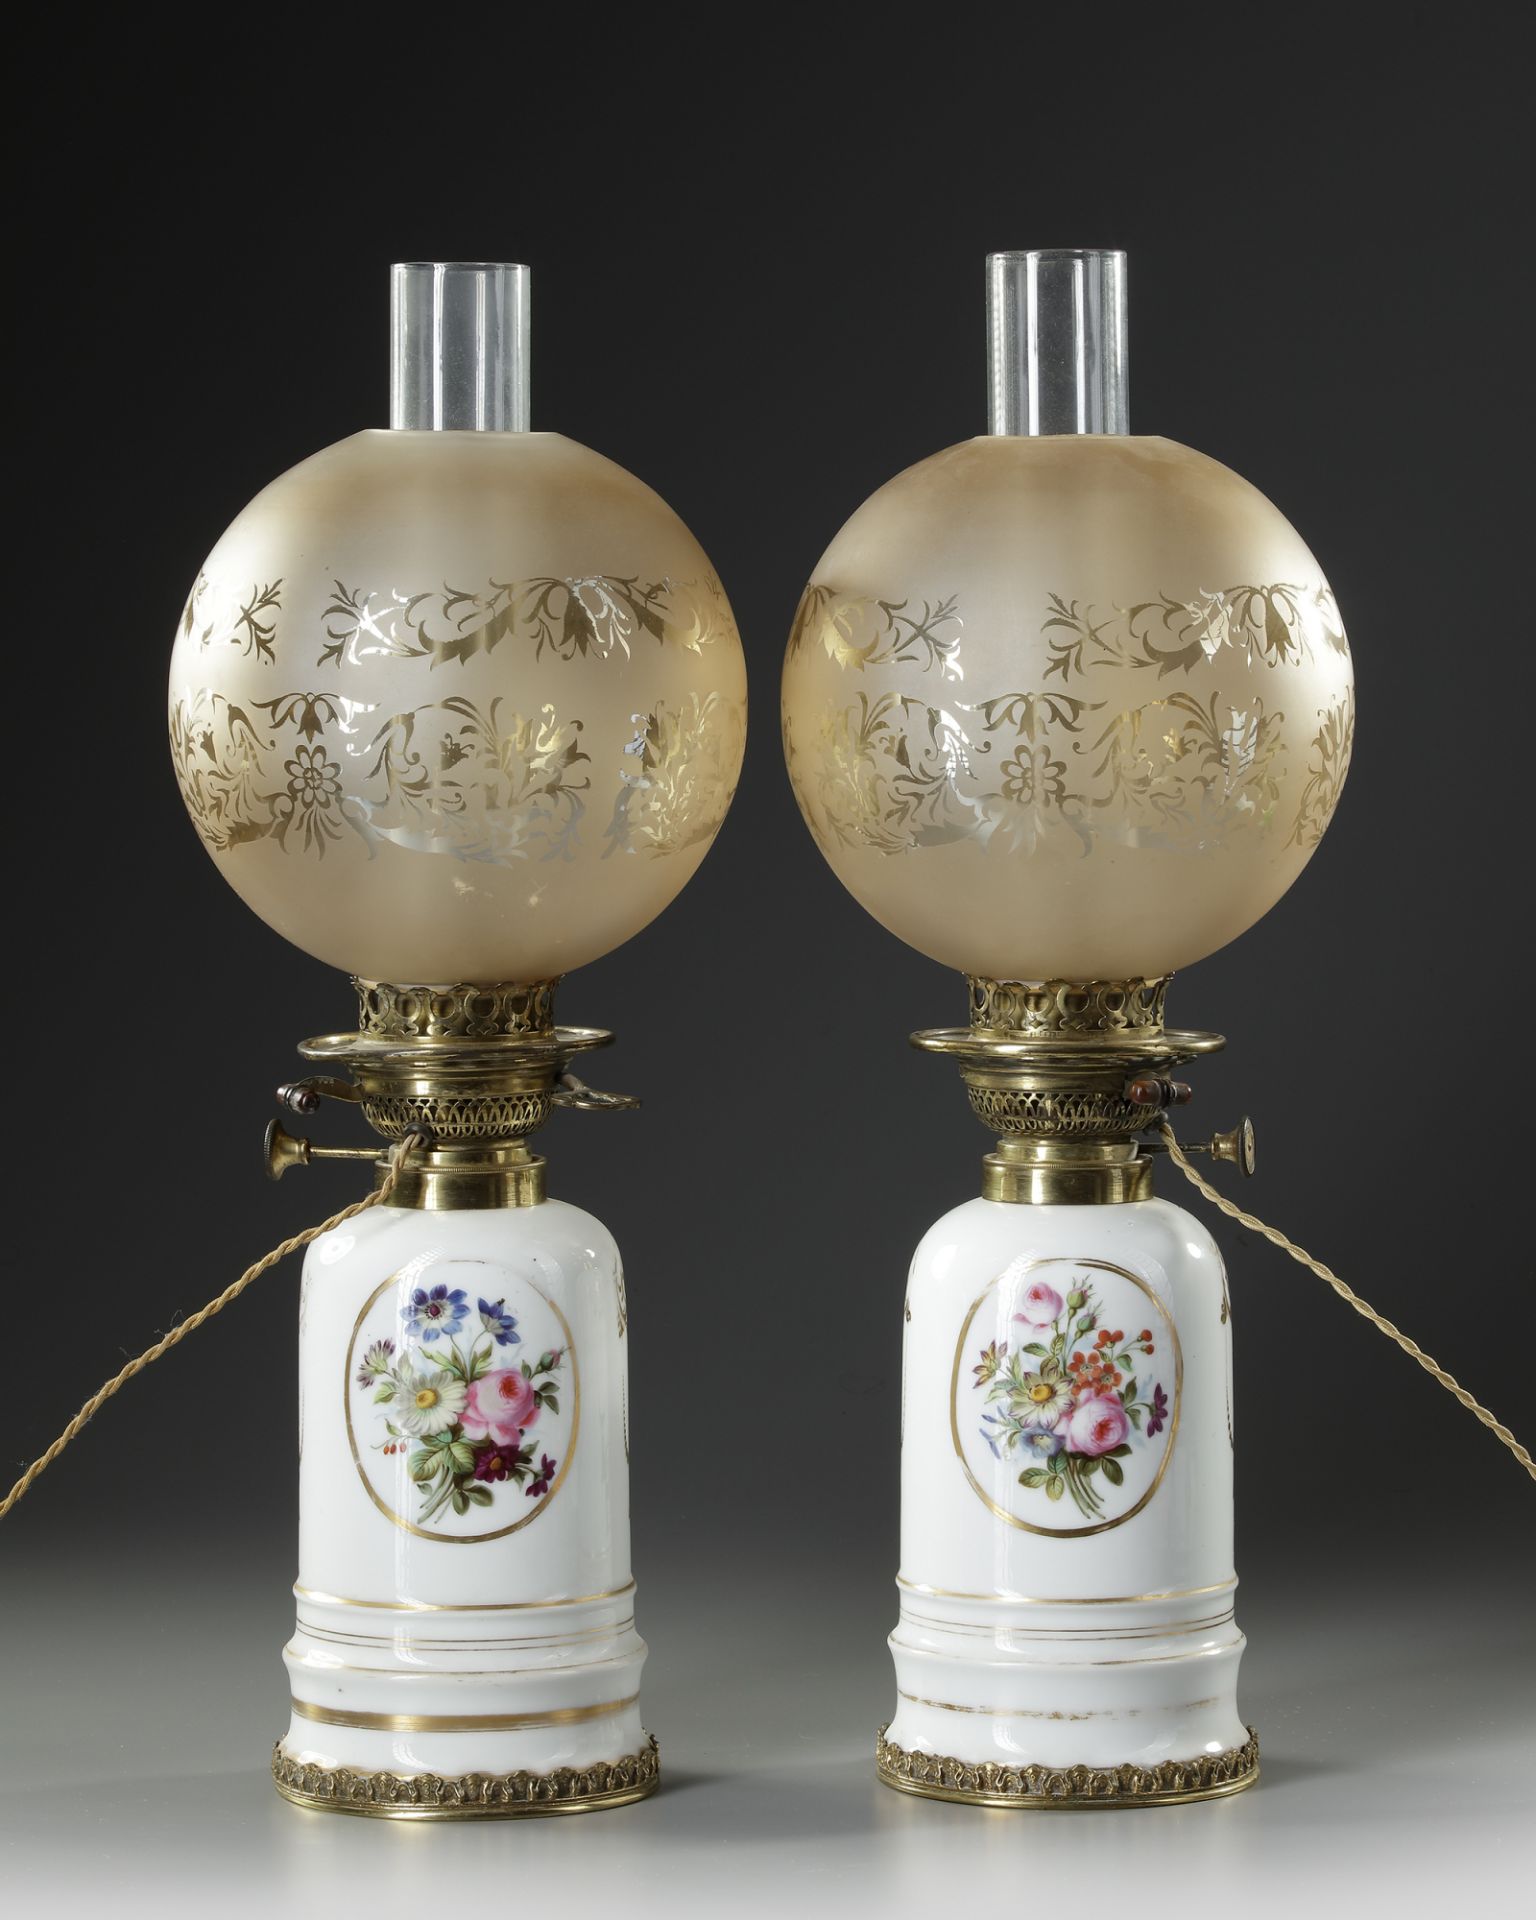 A PAIR OF WHITE PORCELAIN LAMPS, LATE 19TH CENTURY - Image 2 of 2